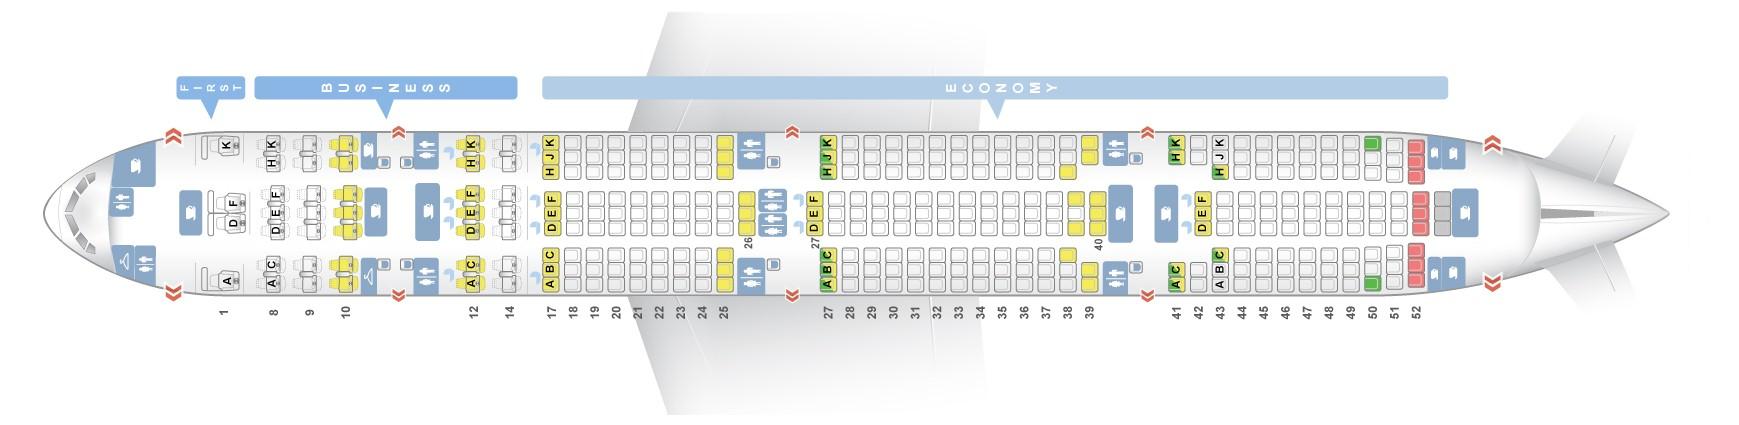 Seat Map Boeing 777 300 Air India Best Seats In The Plane